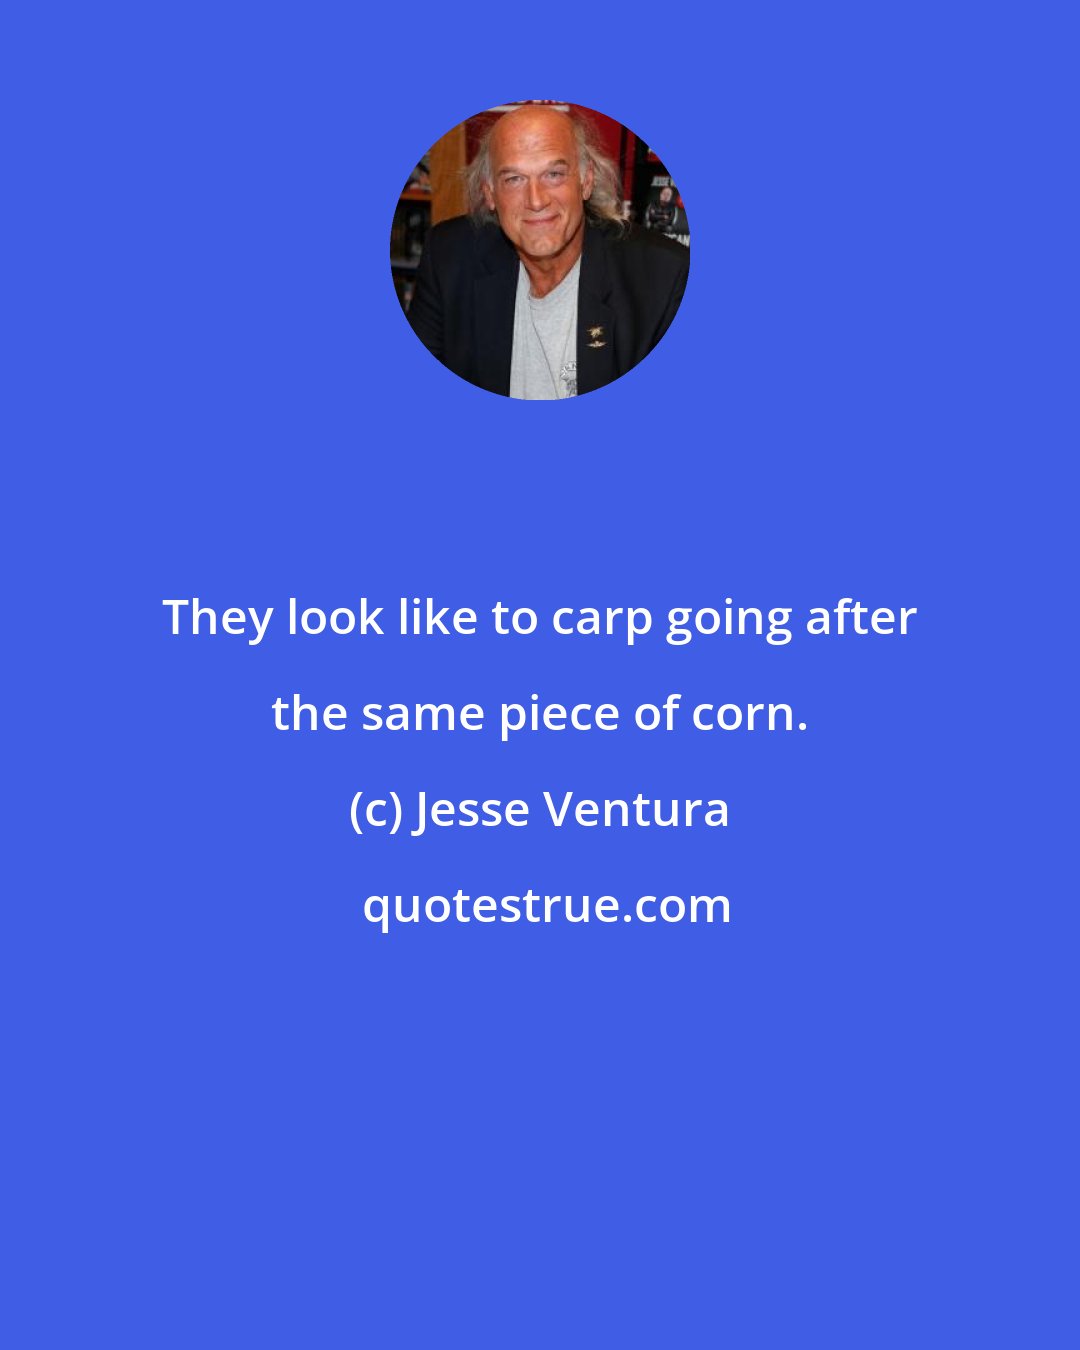 Jesse Ventura: They look like to carp going after the same piece of corn.